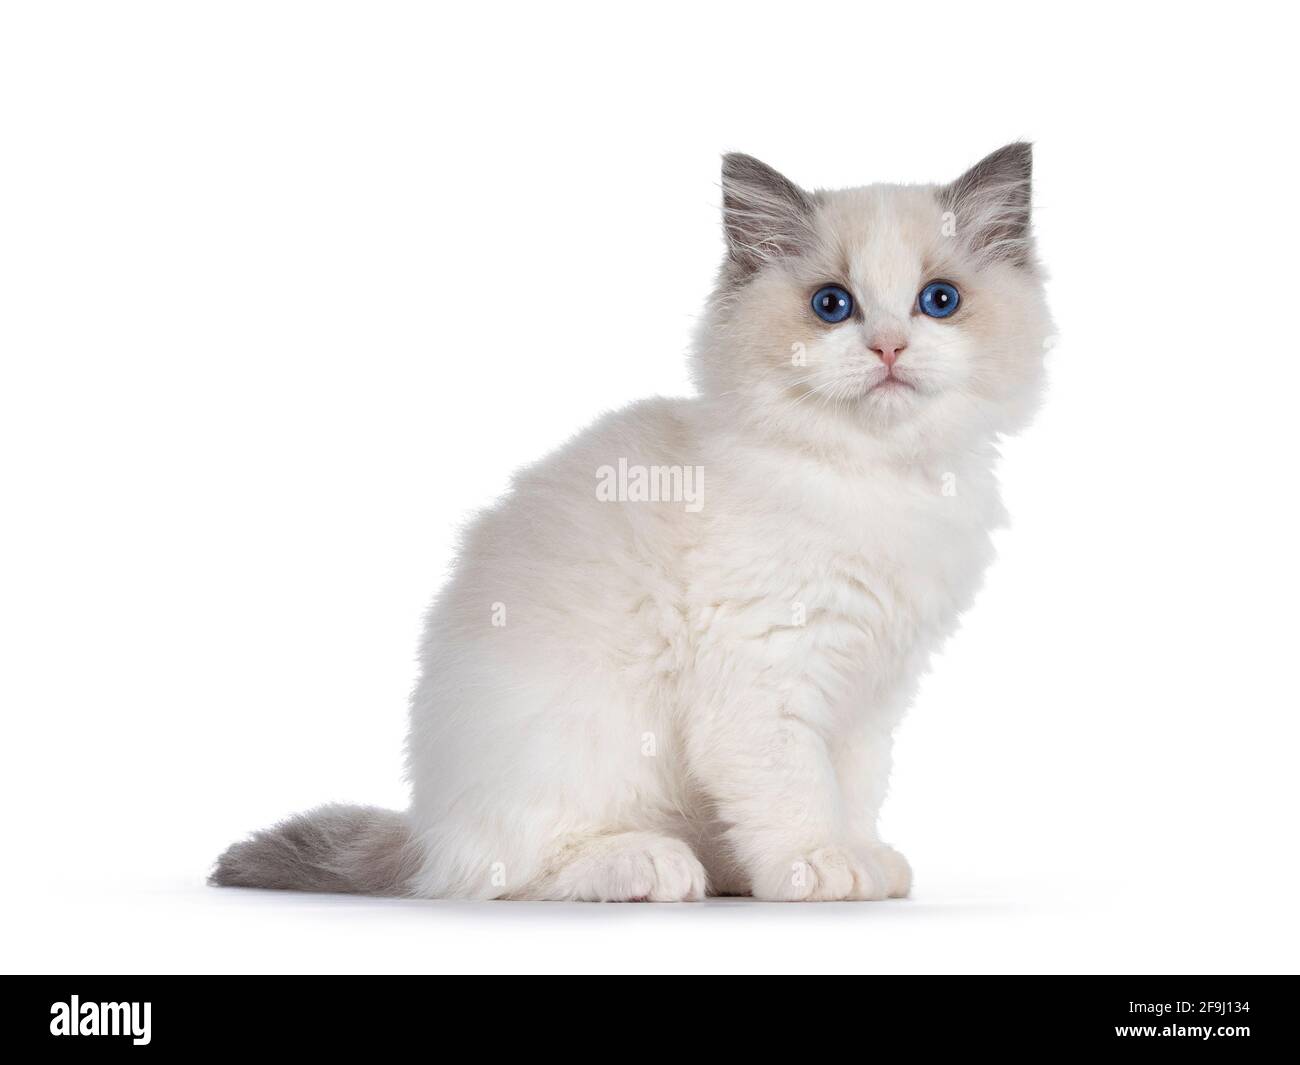 Cute blue bicolor Ragdoll cat kitte, sitting side ways. Looking towards camera with blue eyes. Isolated on a white background. Stock Photo